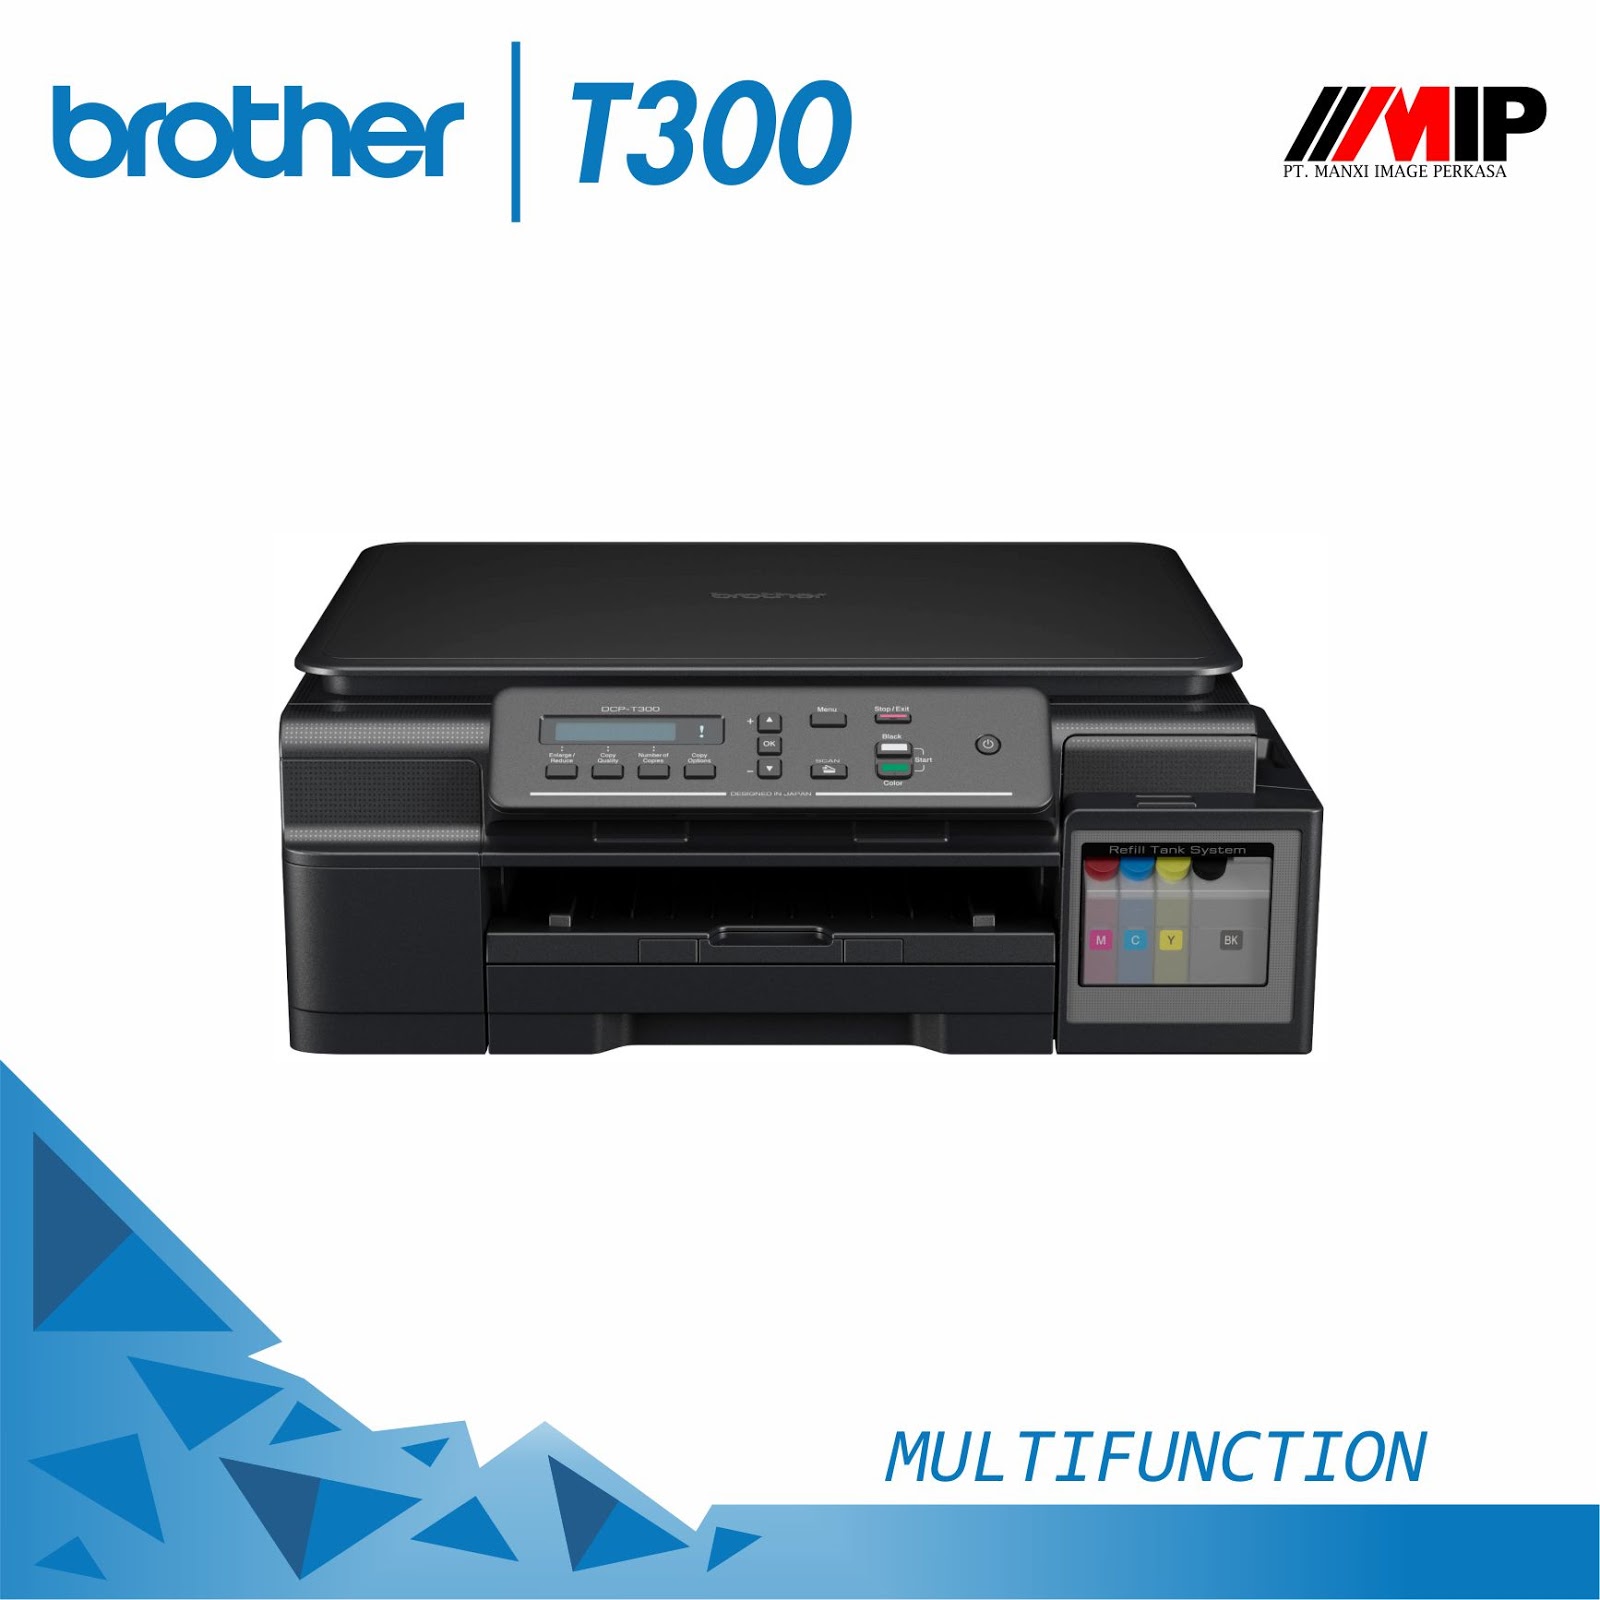 Brother t300